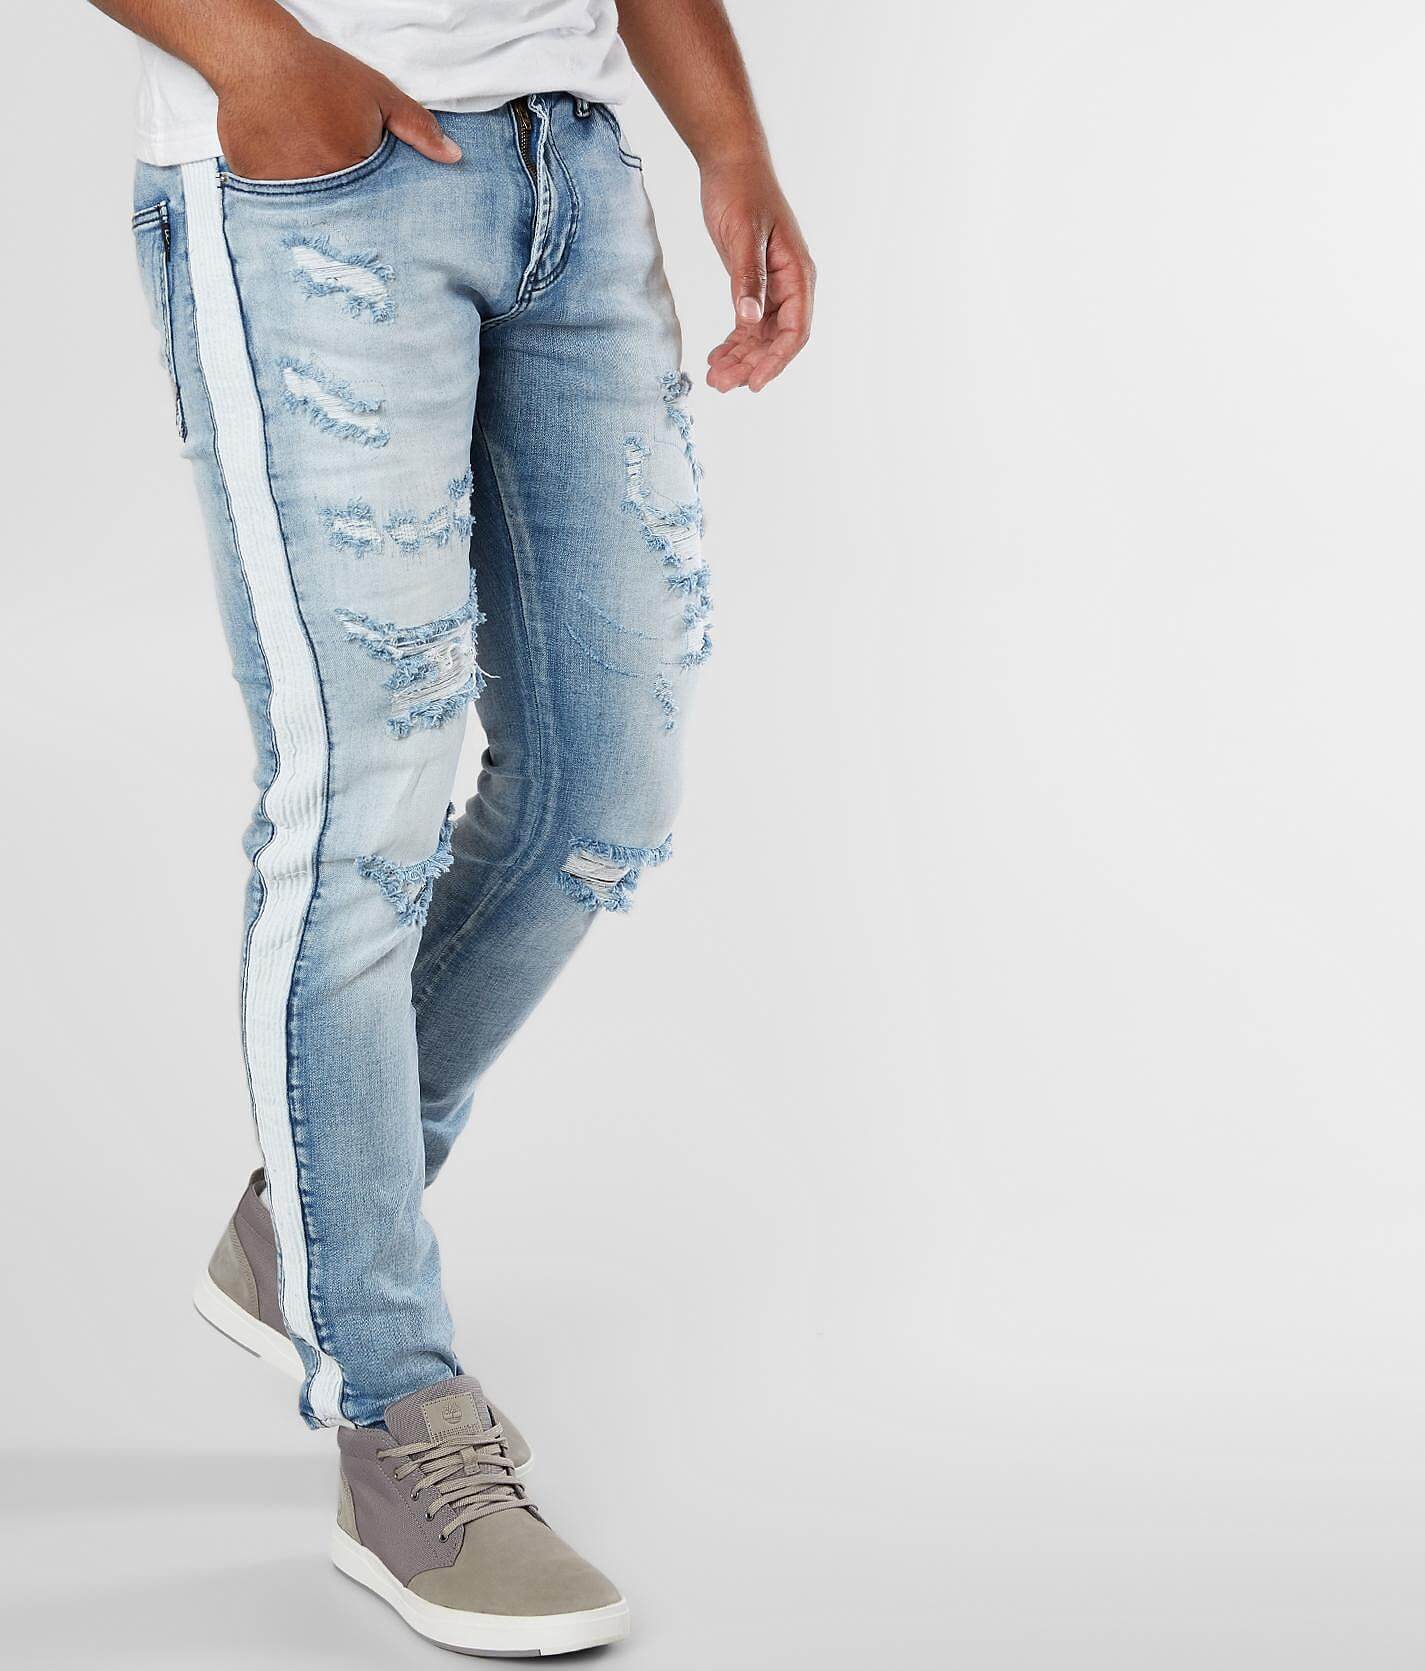 jeans with white stripe mens